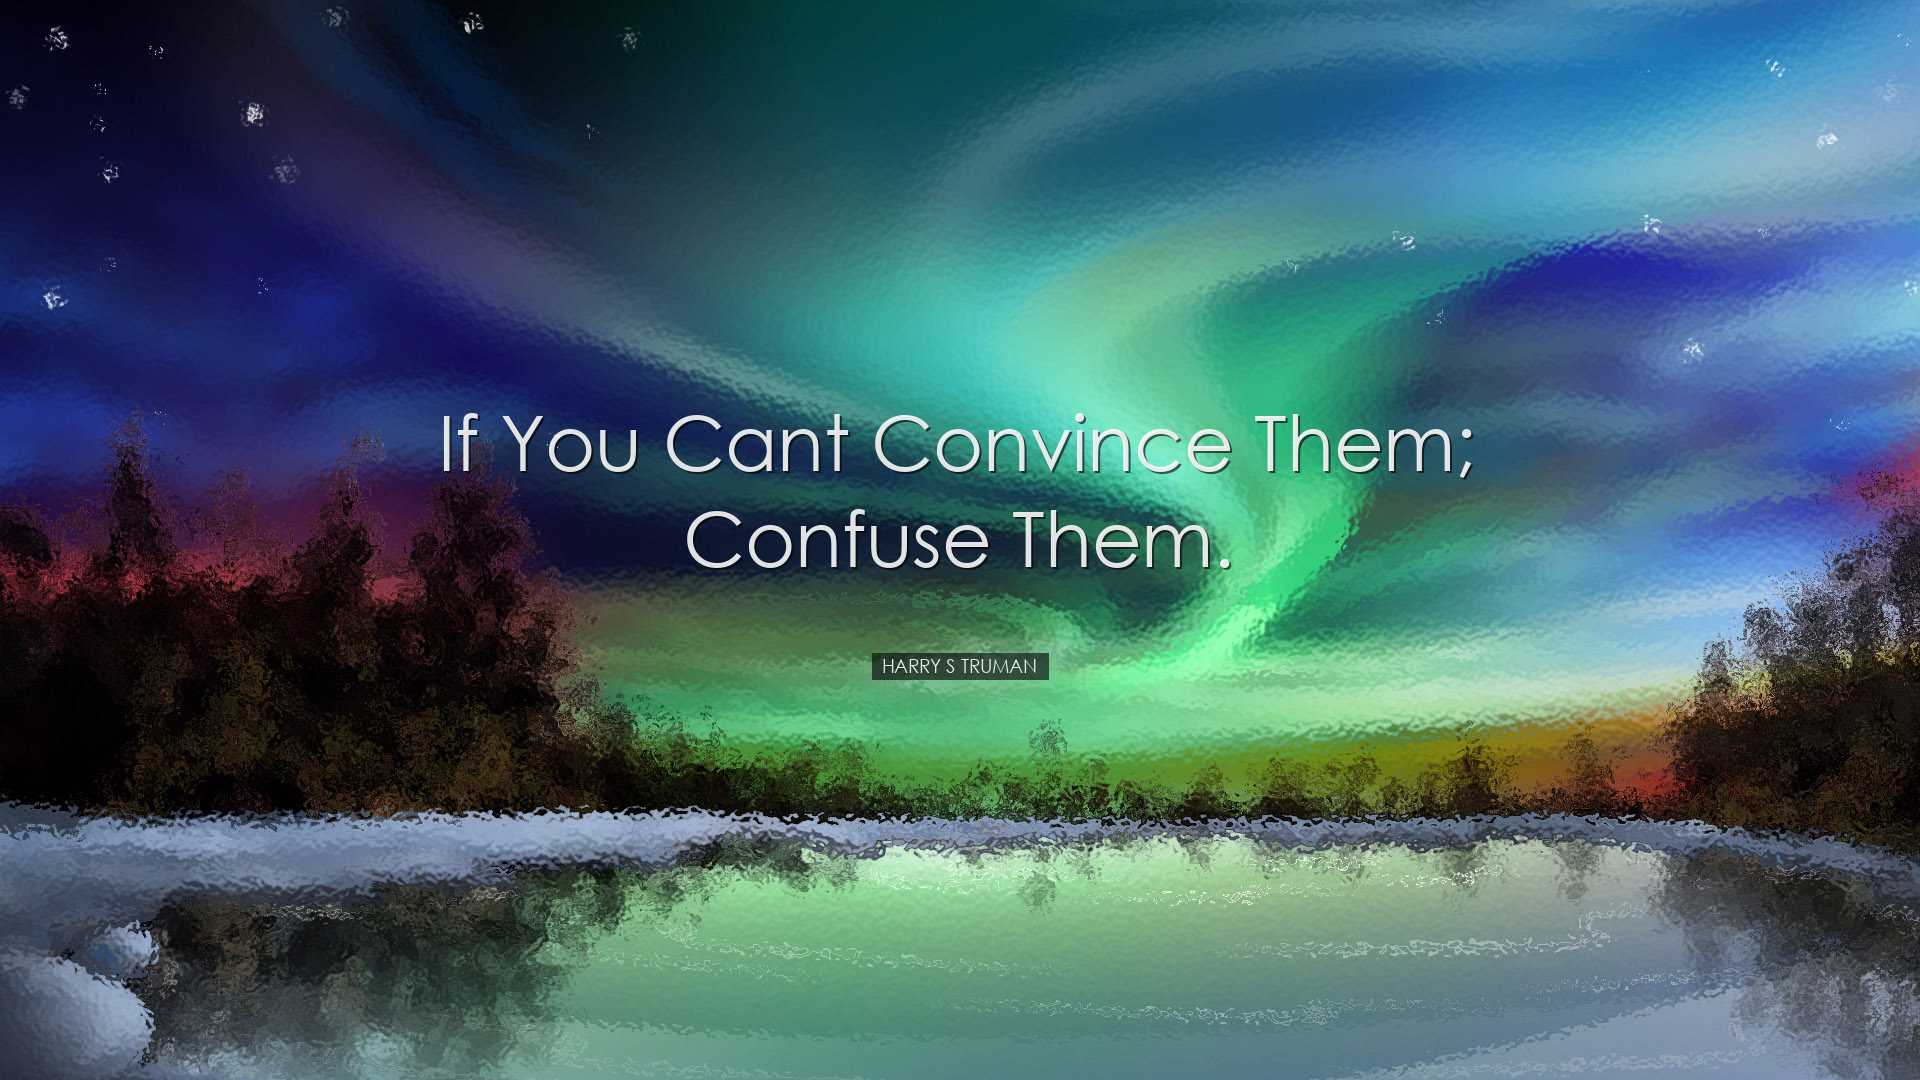 If you cant convince them; confuse them. - Harry S Truman